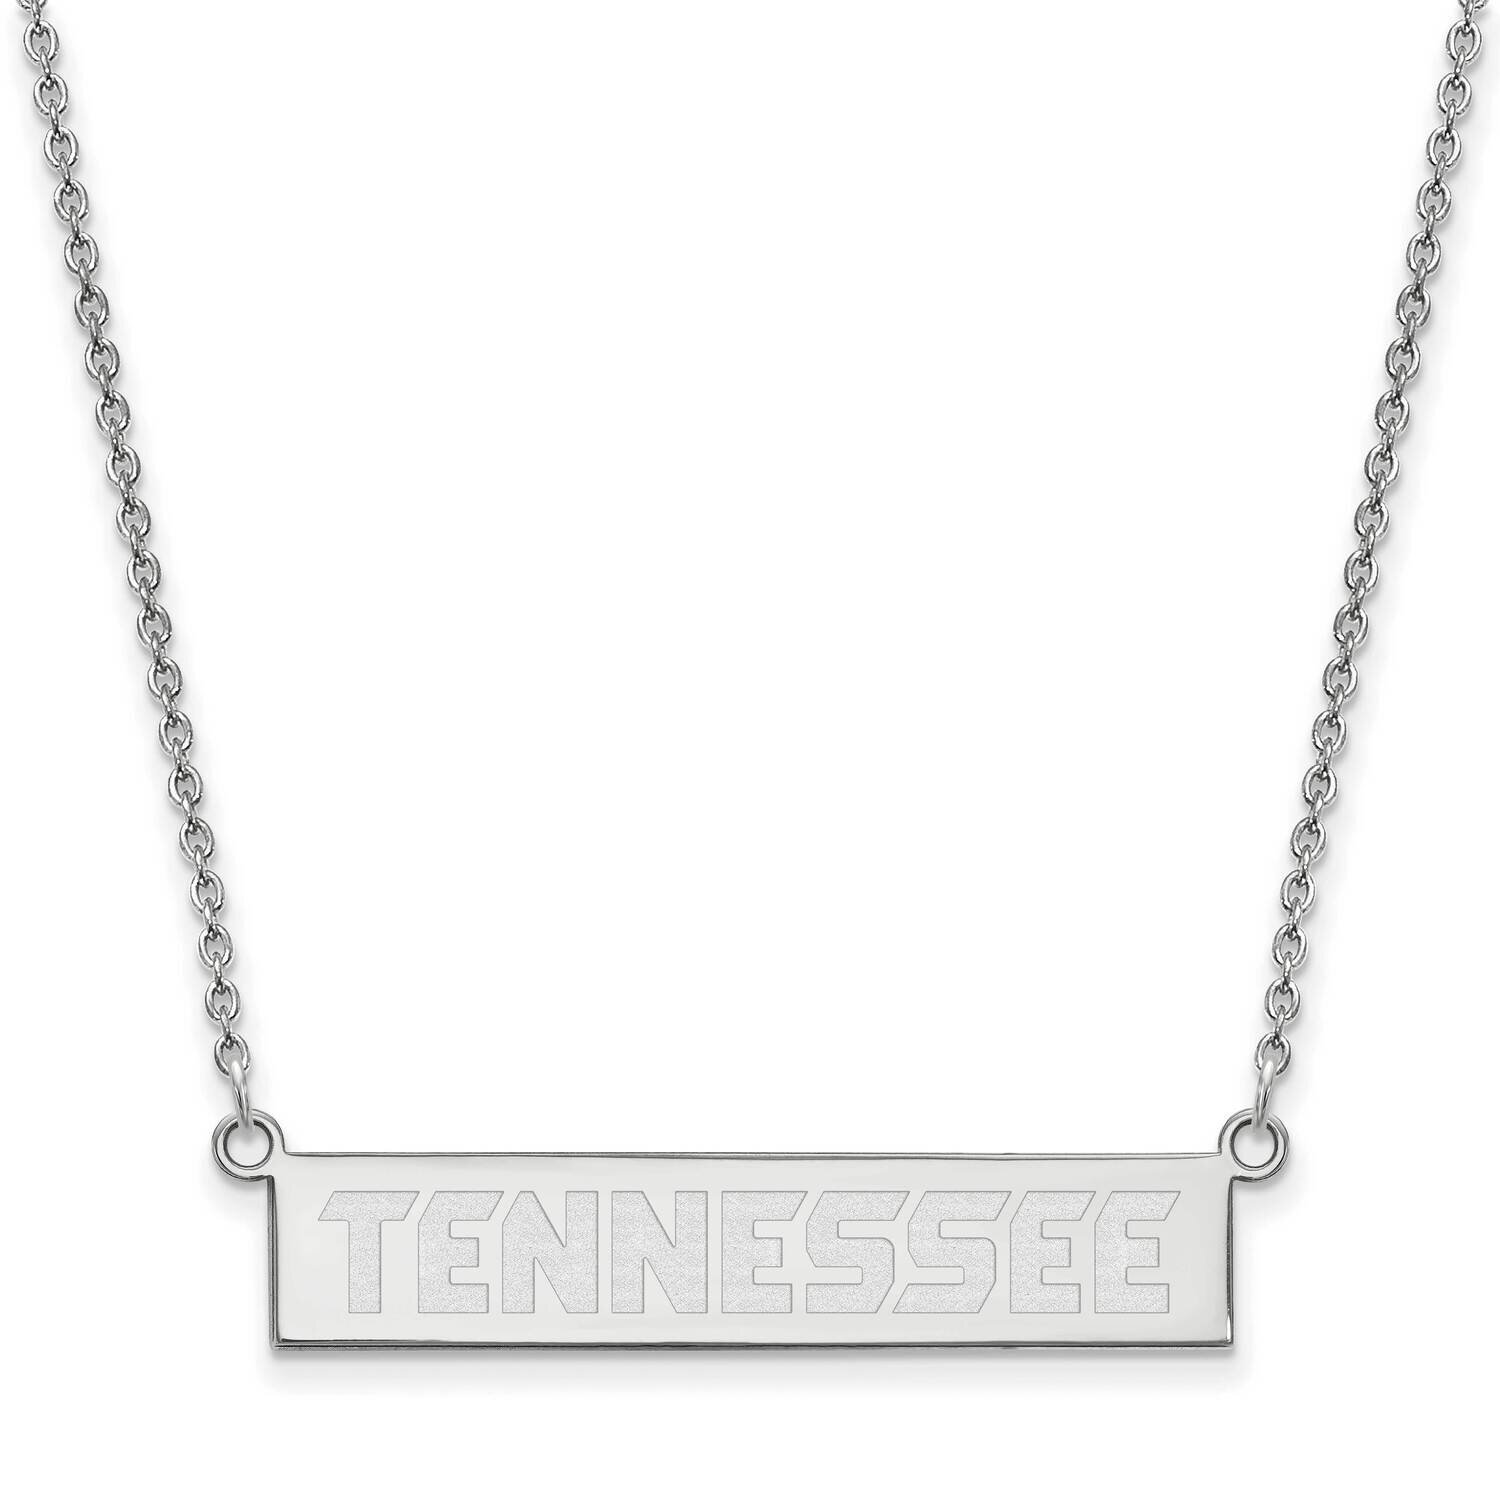 University of Tennessee Knoxville Small Bar Necklace Sterling Silver Rhodium-plated SS082UTN-18